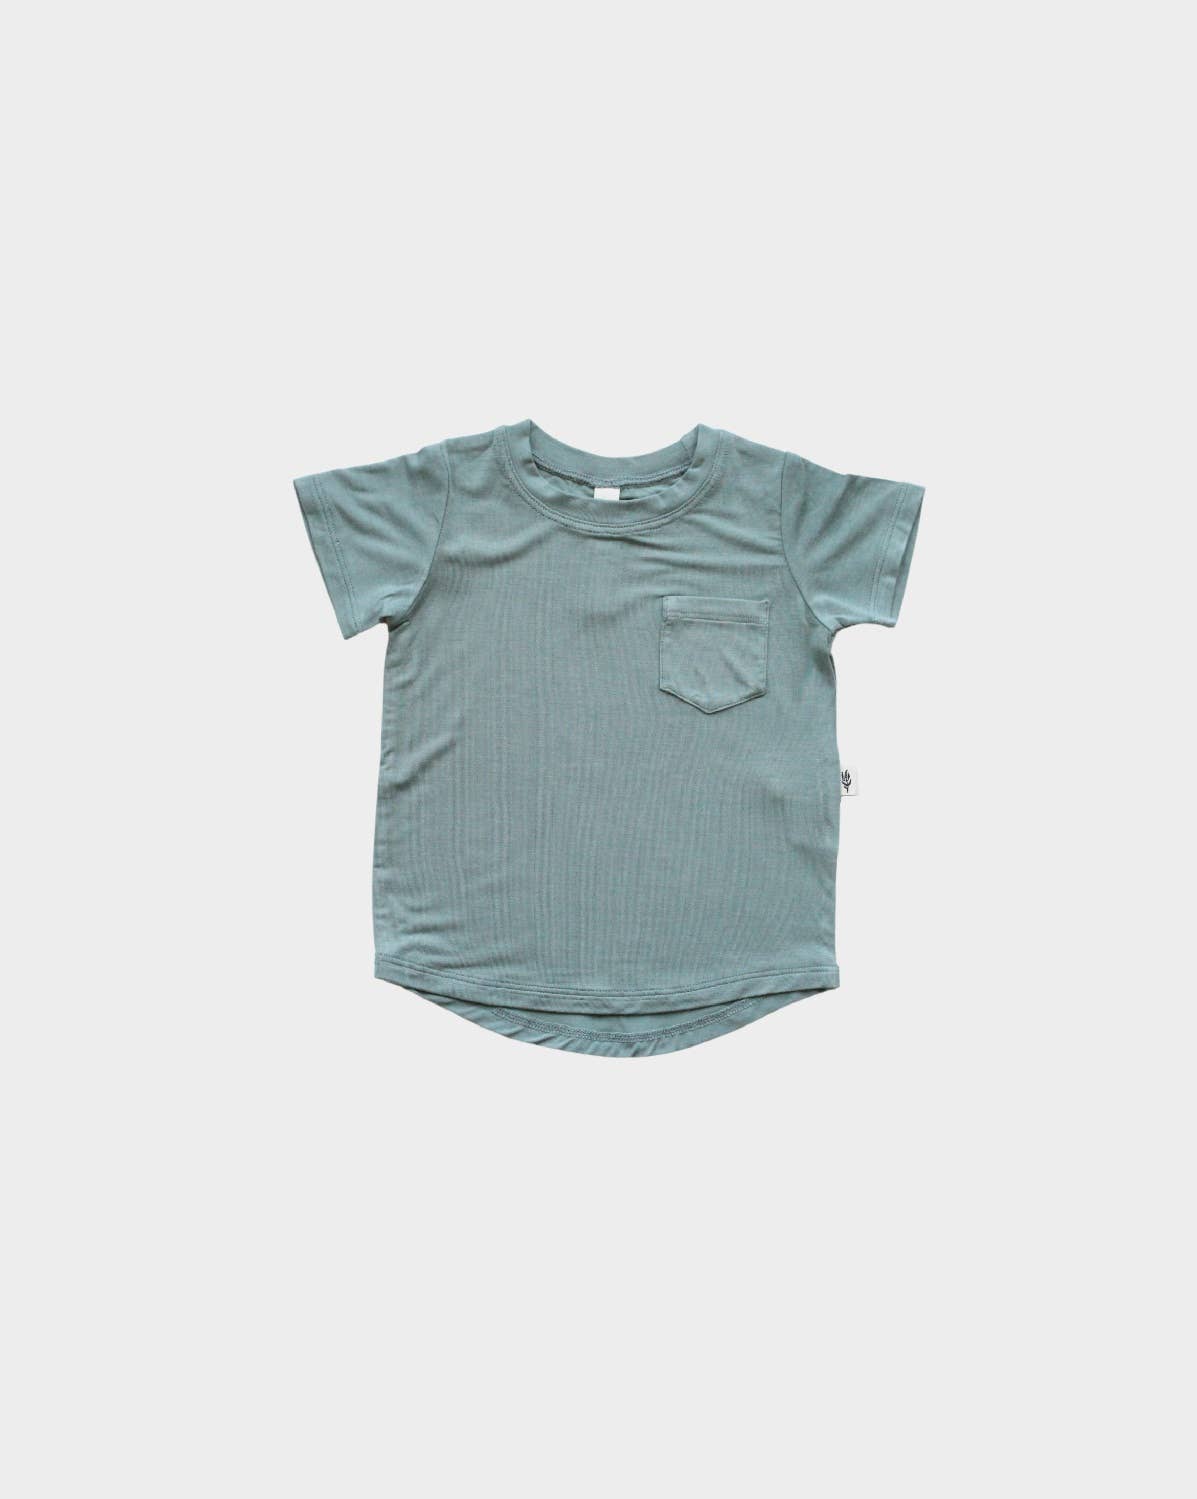 babysprouts clothing company - S23 D2: Baby Boy Pocket Tee in Teal Green - kennethodaniel